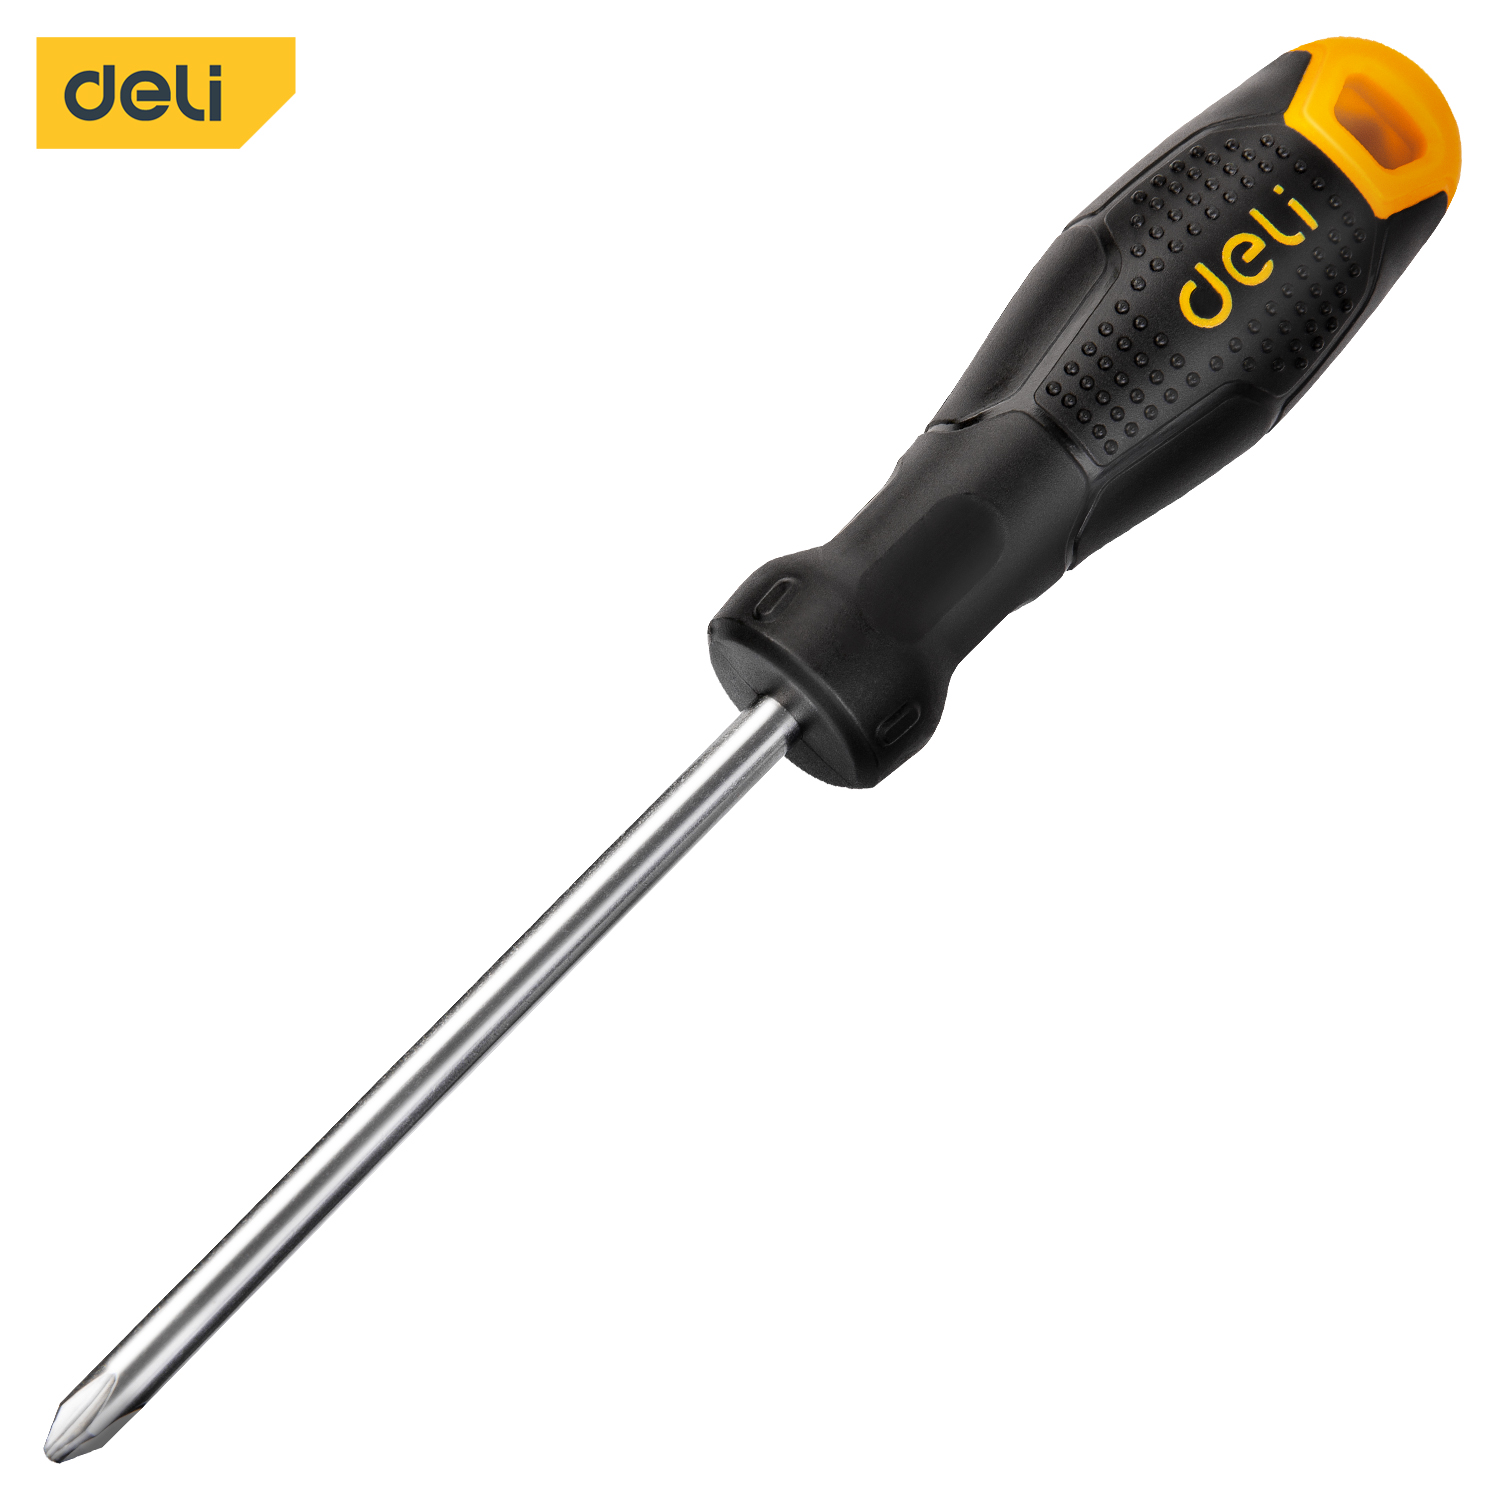 insulated crosshead Precision Screwdriver for watches